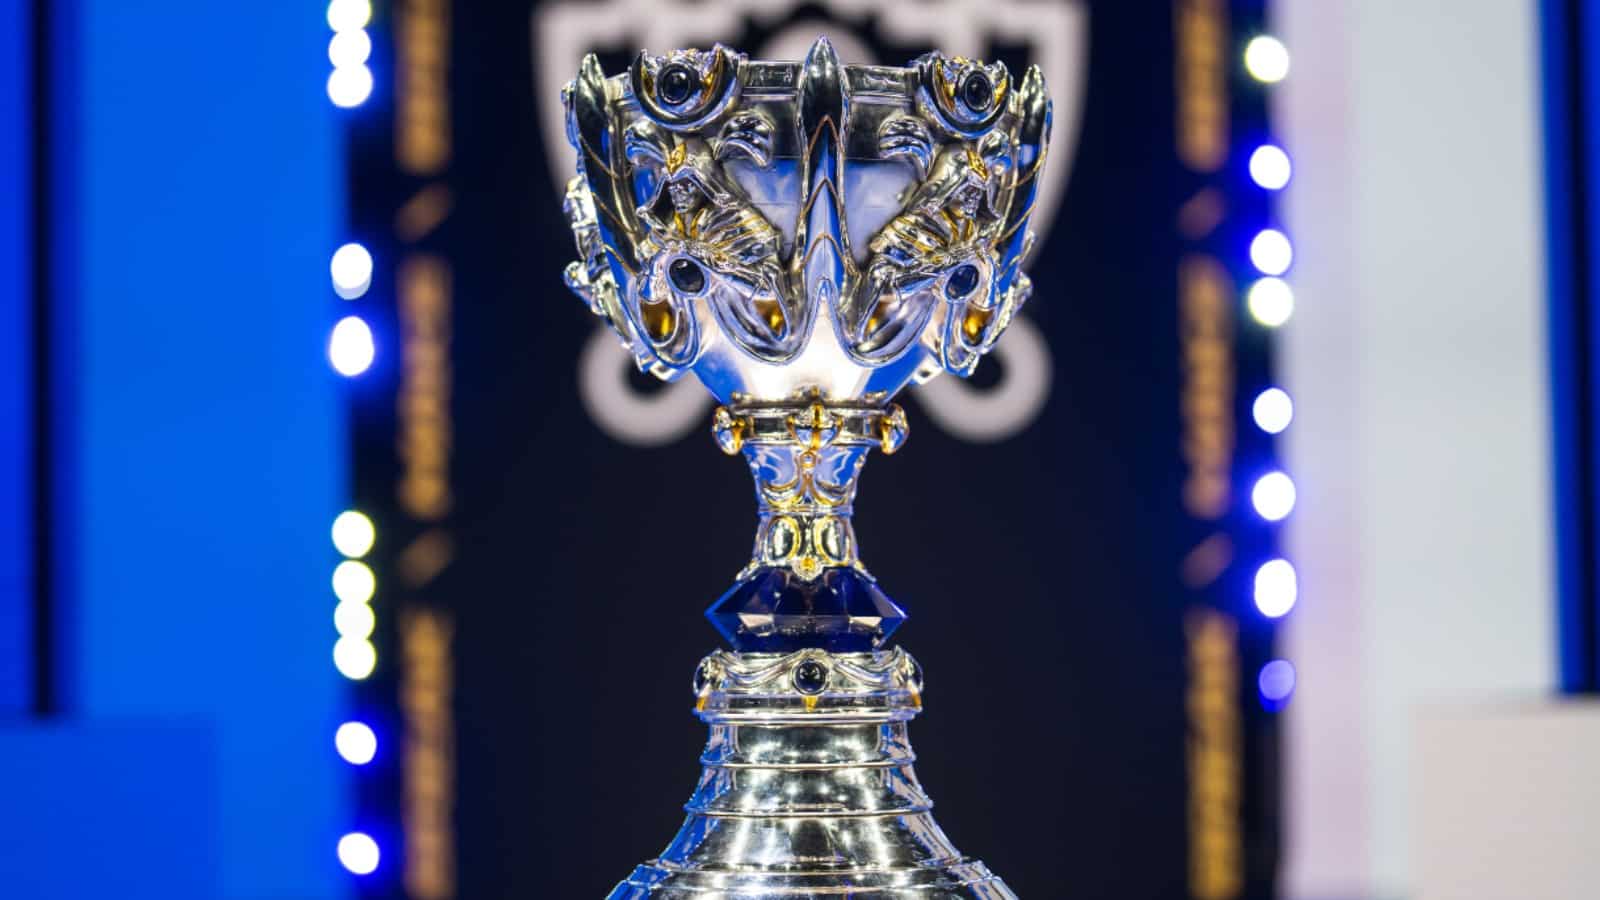 Image of the Worlds 2021 trophy